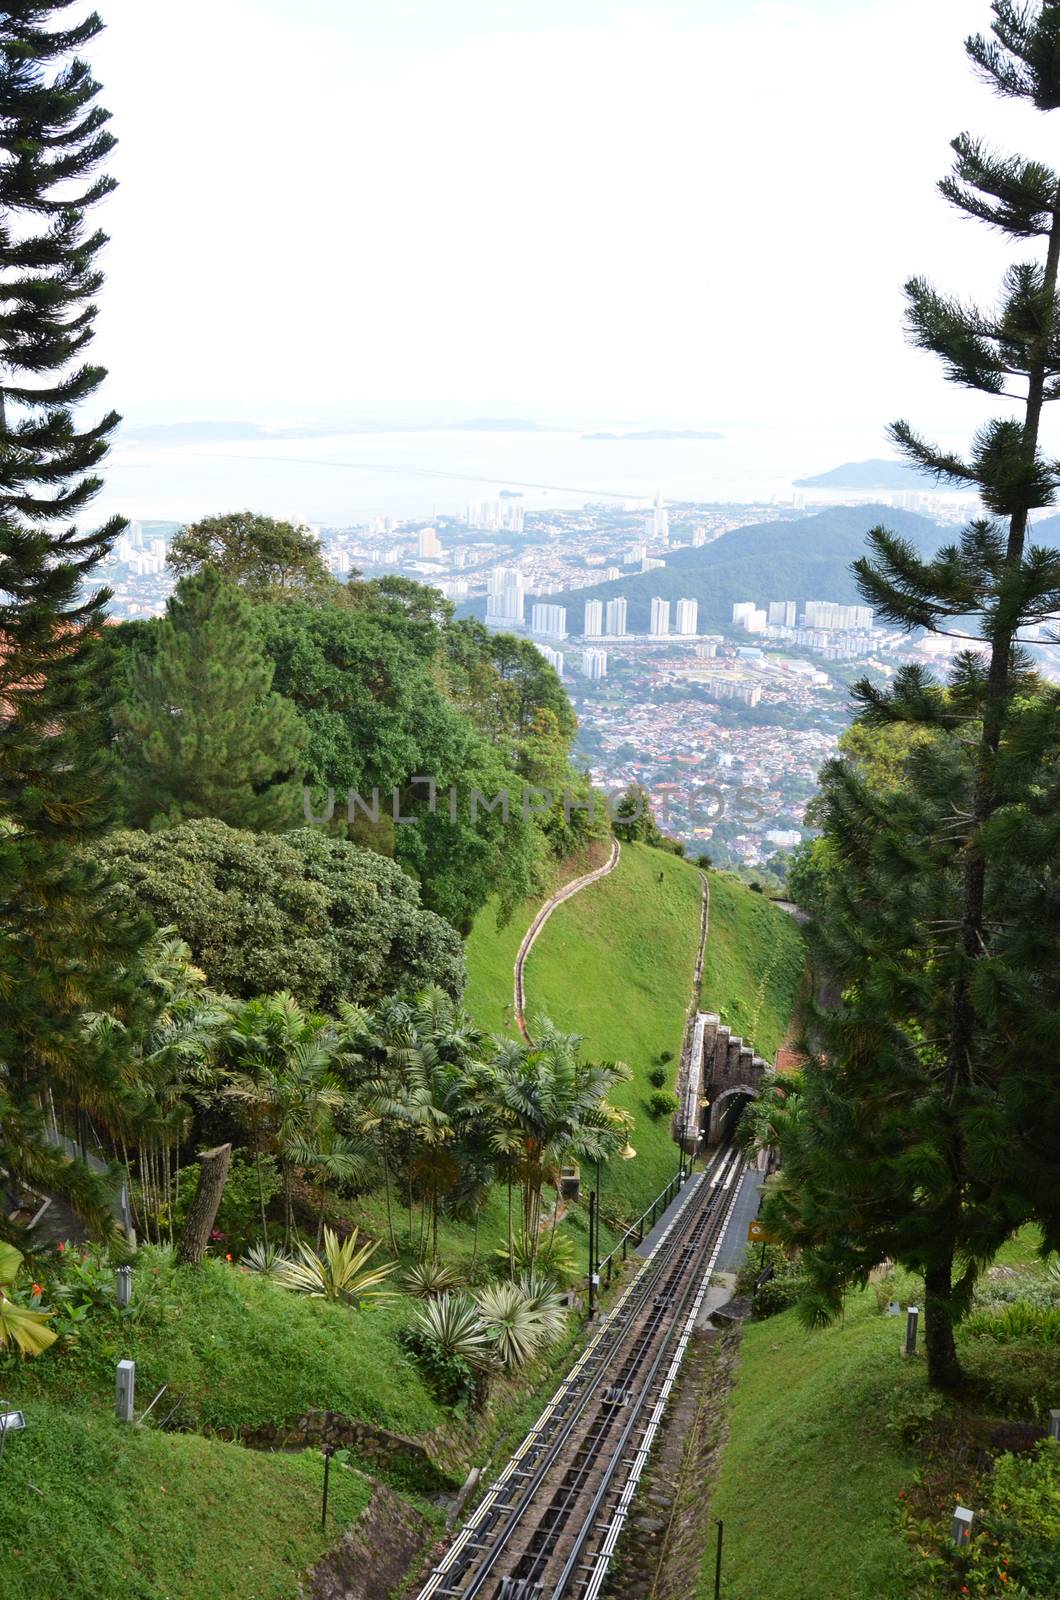 A tram railway on Penang Hil in Malaysia.